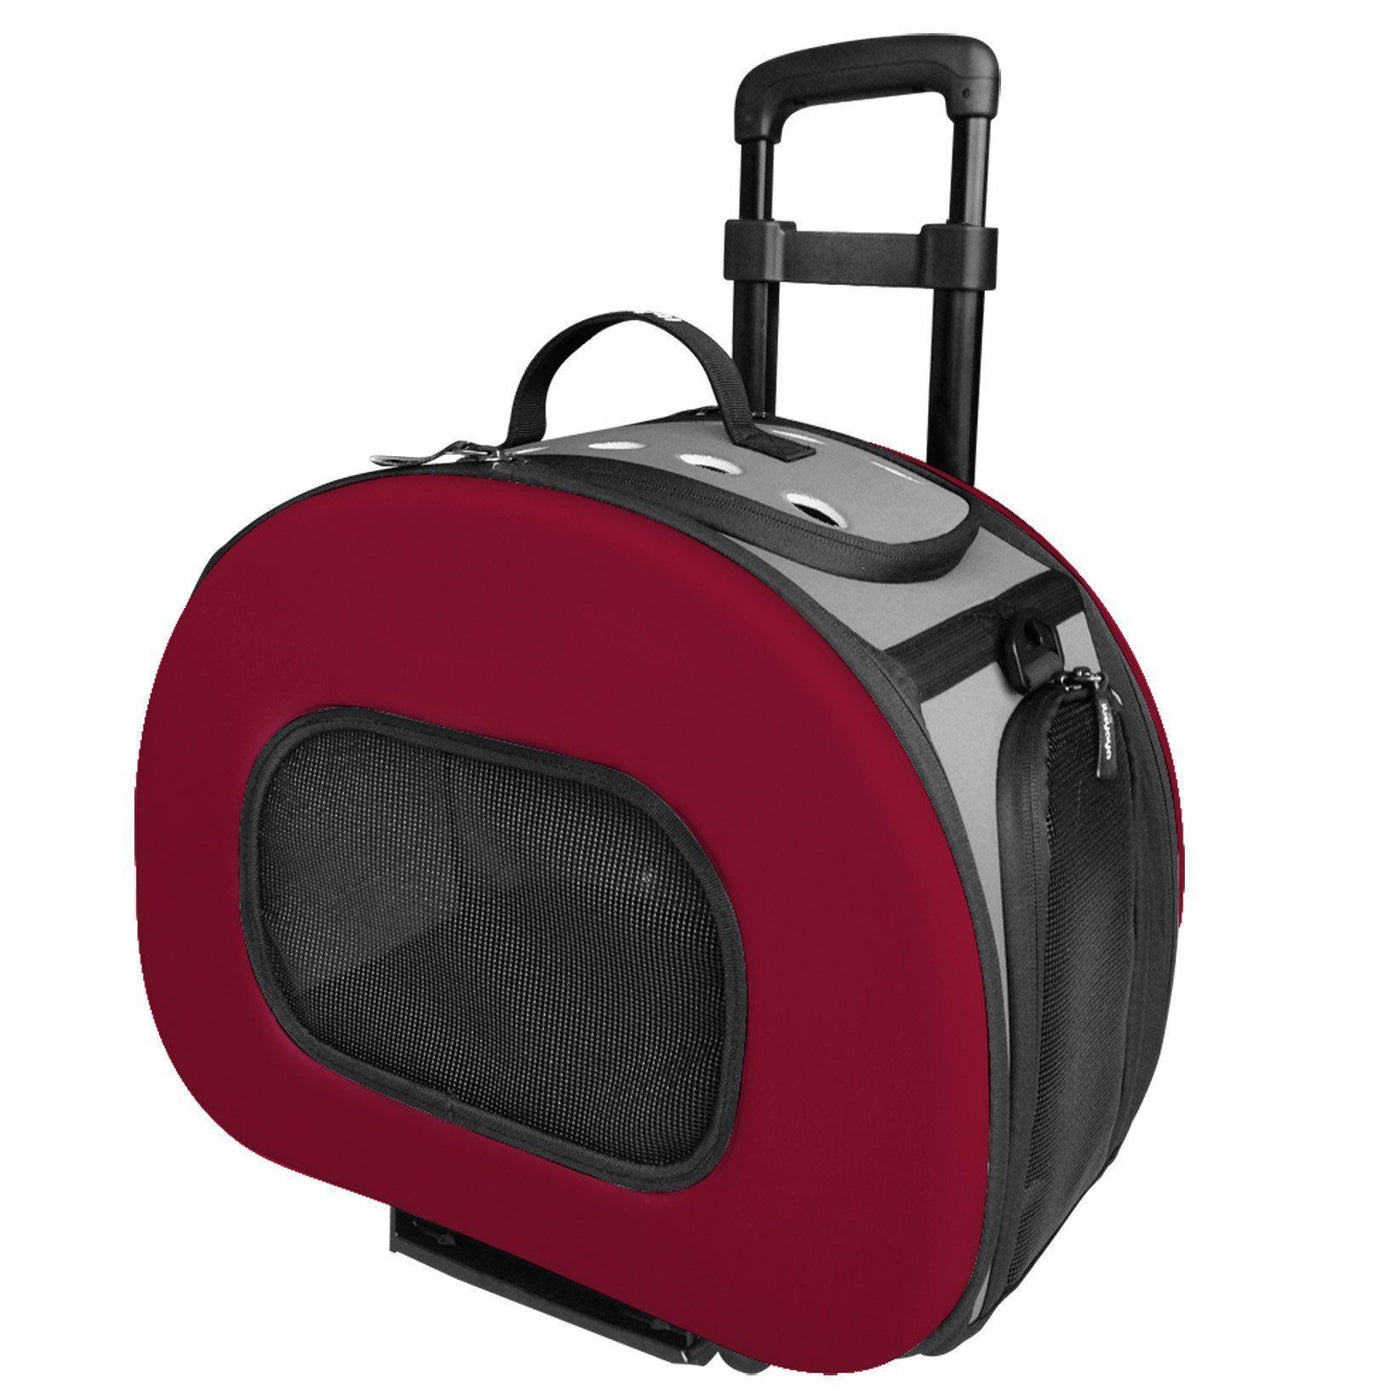 Wheeled Airline Approved Pet Carrier  Pet Carrier with Wheels – Pet Life